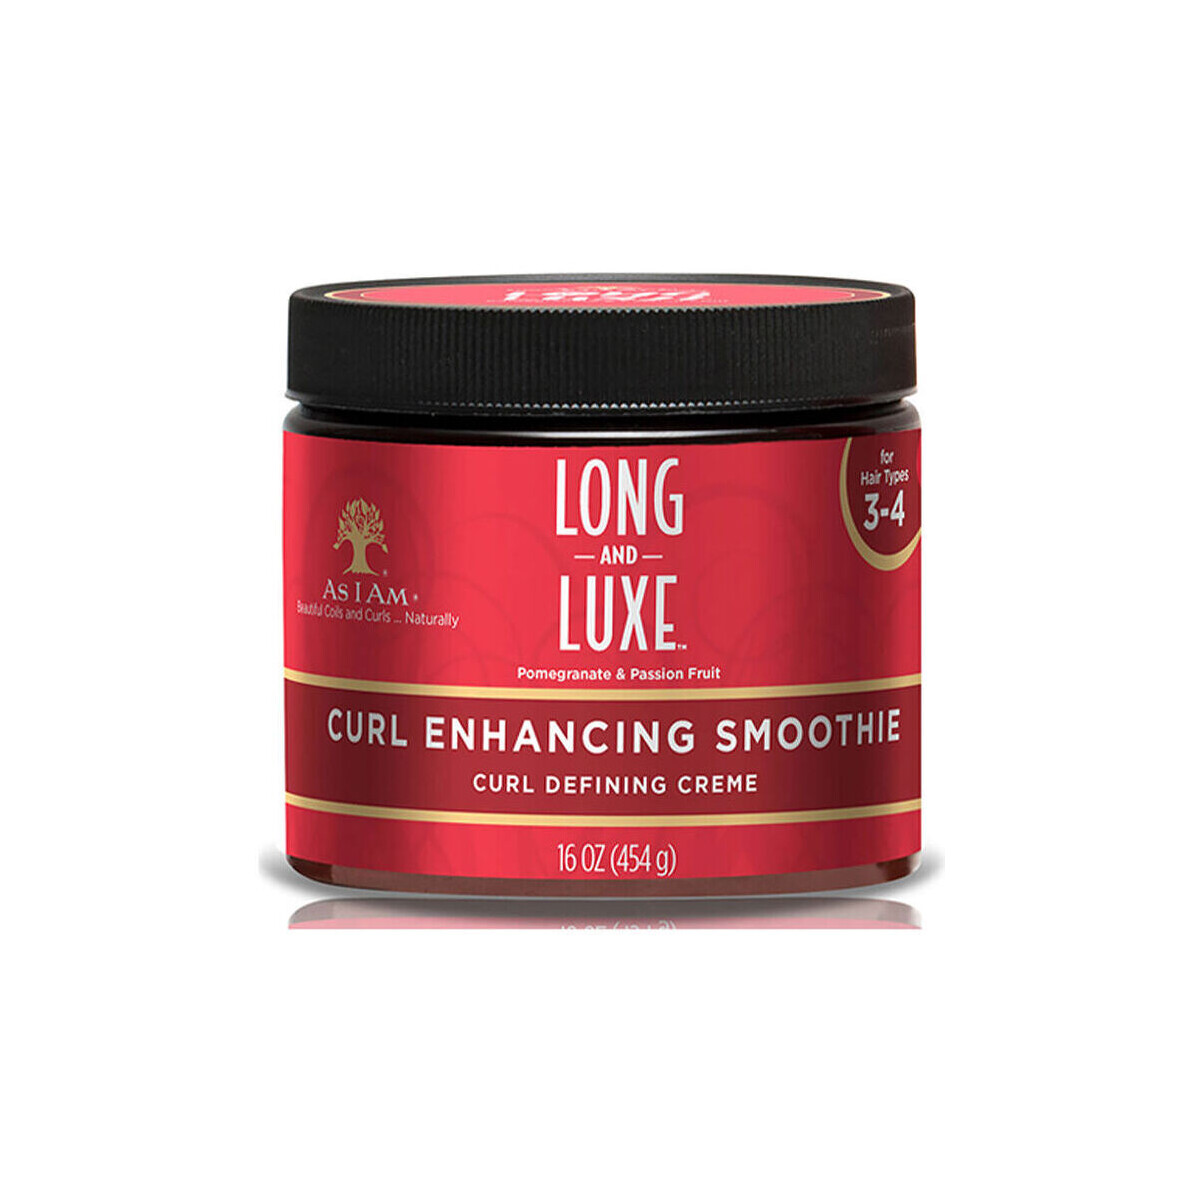 Beauté Femme Soins & Après-shampooing As I Am Long And Luxe Curl Enhaning Smoothie 454 Gr 